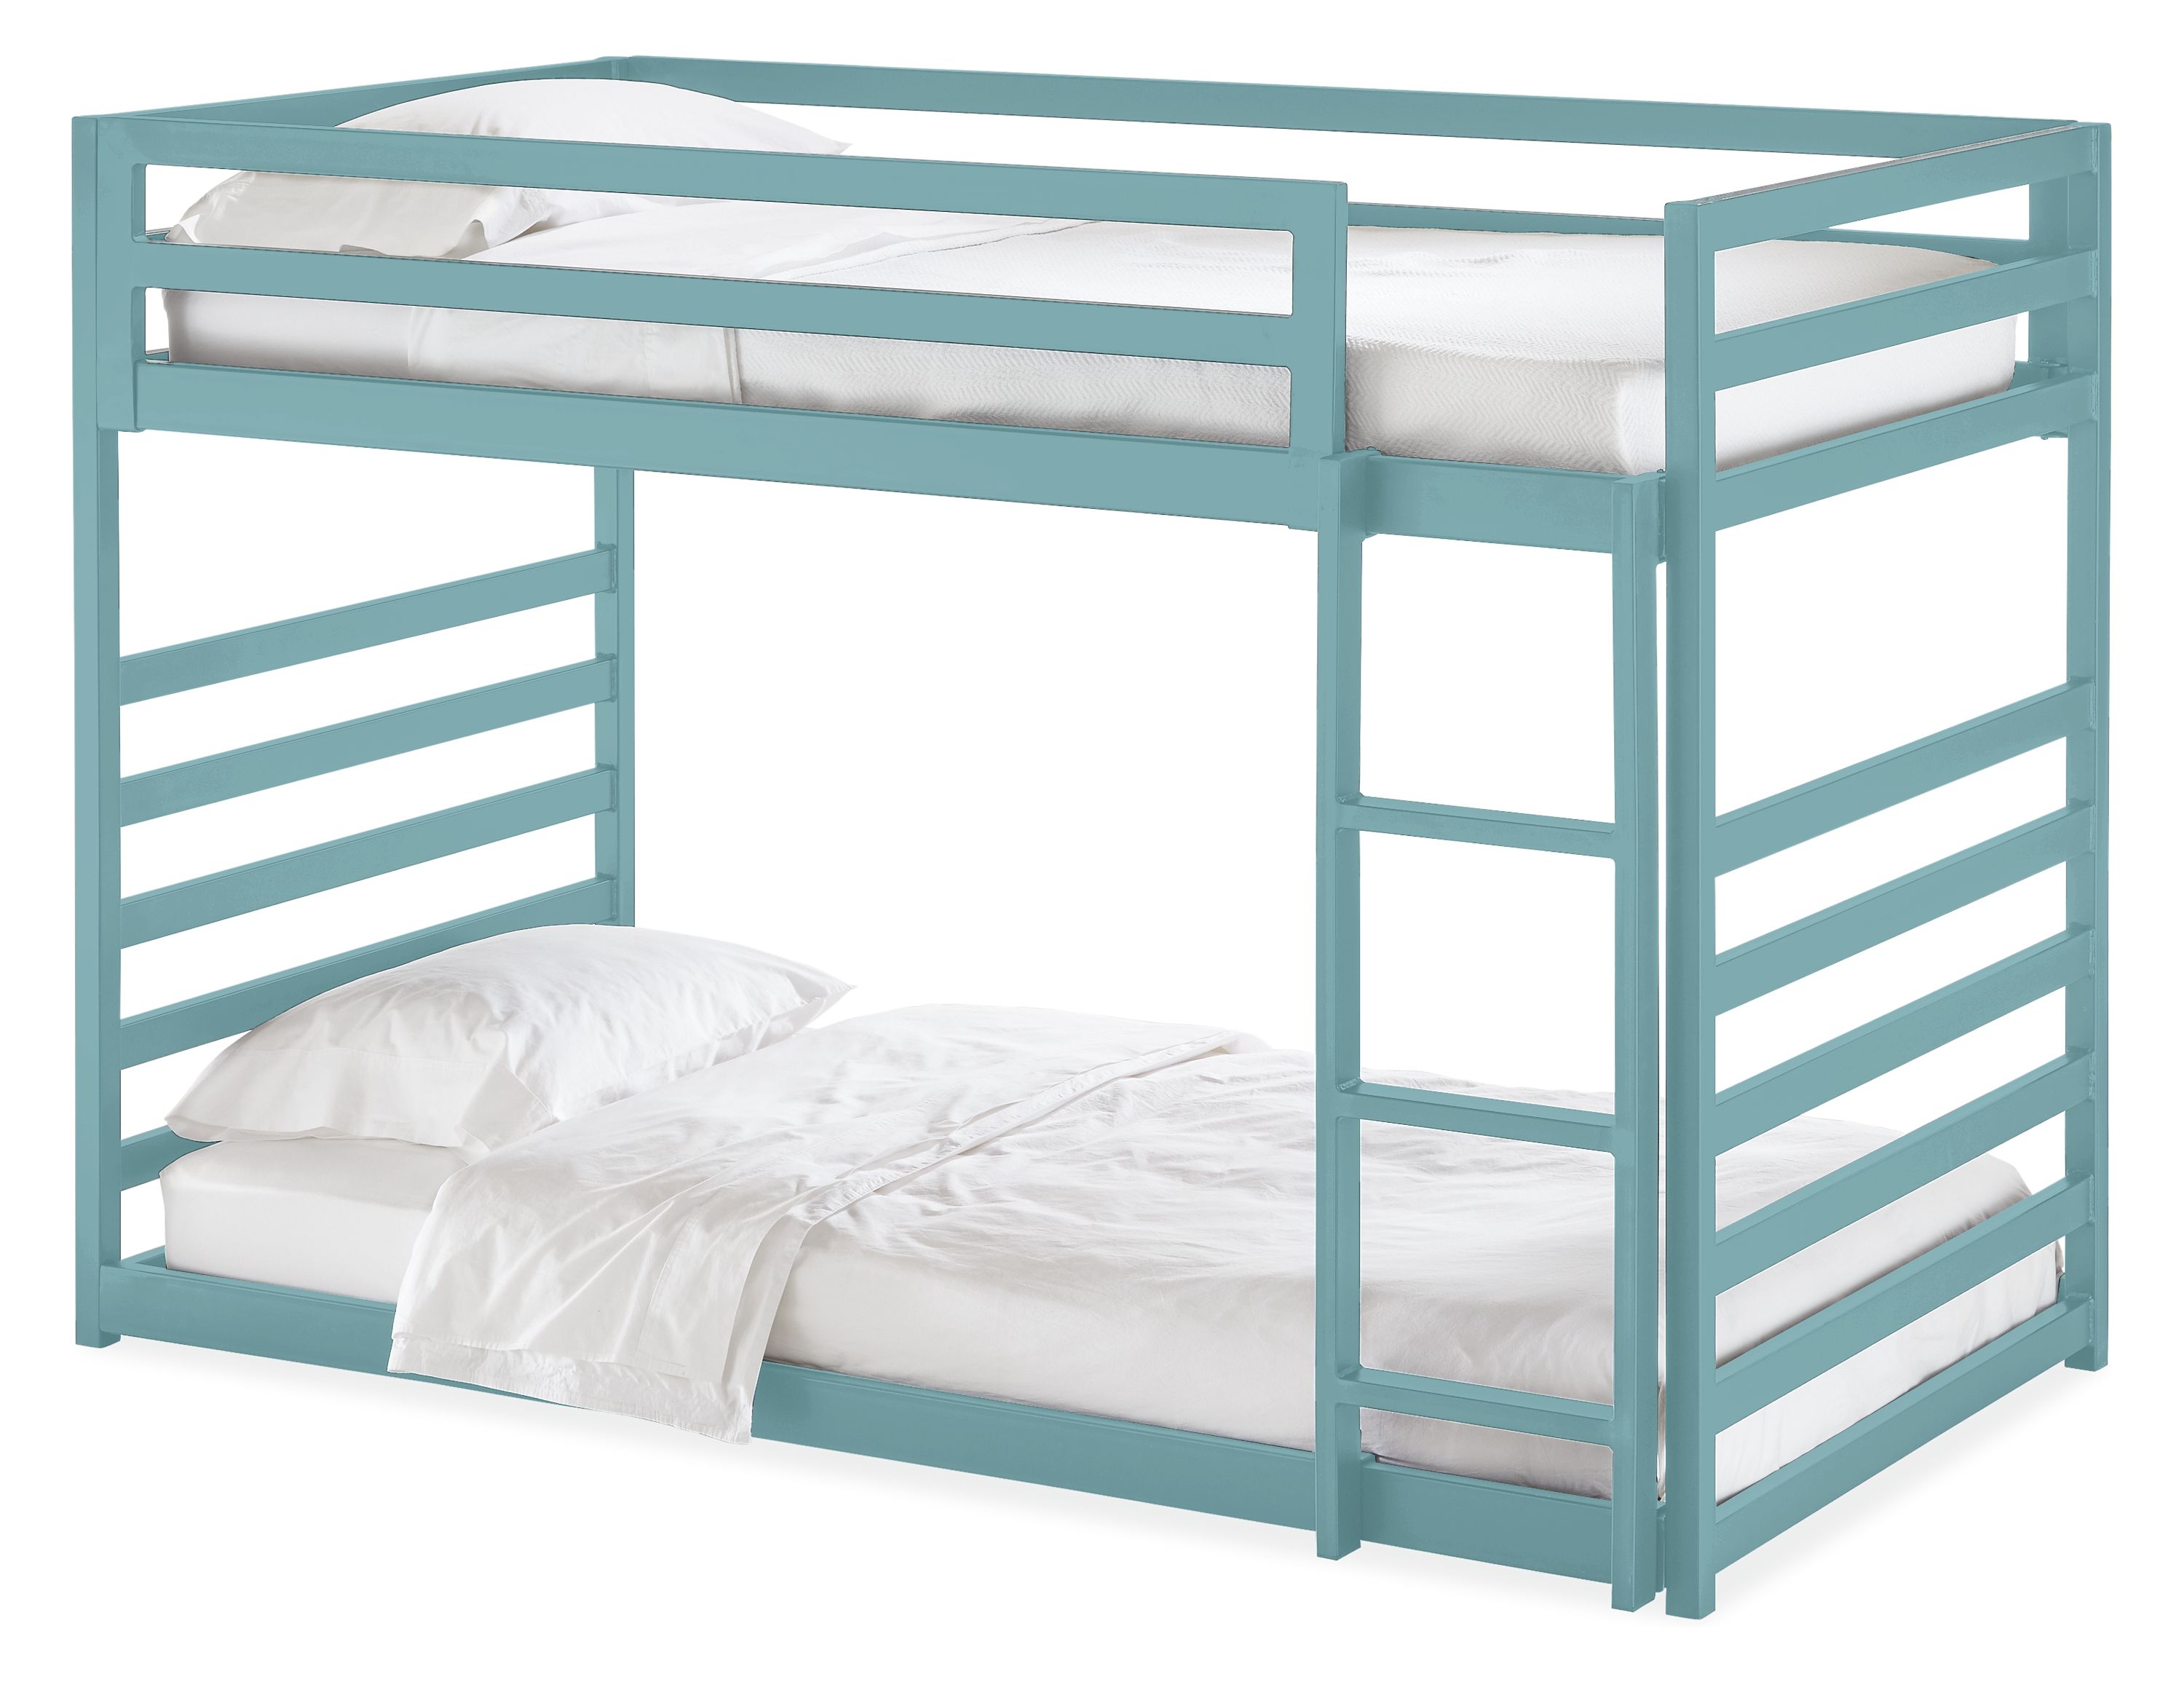 Fort Bunk Beds In Colors Twin Over, Types Of Bunk Beds